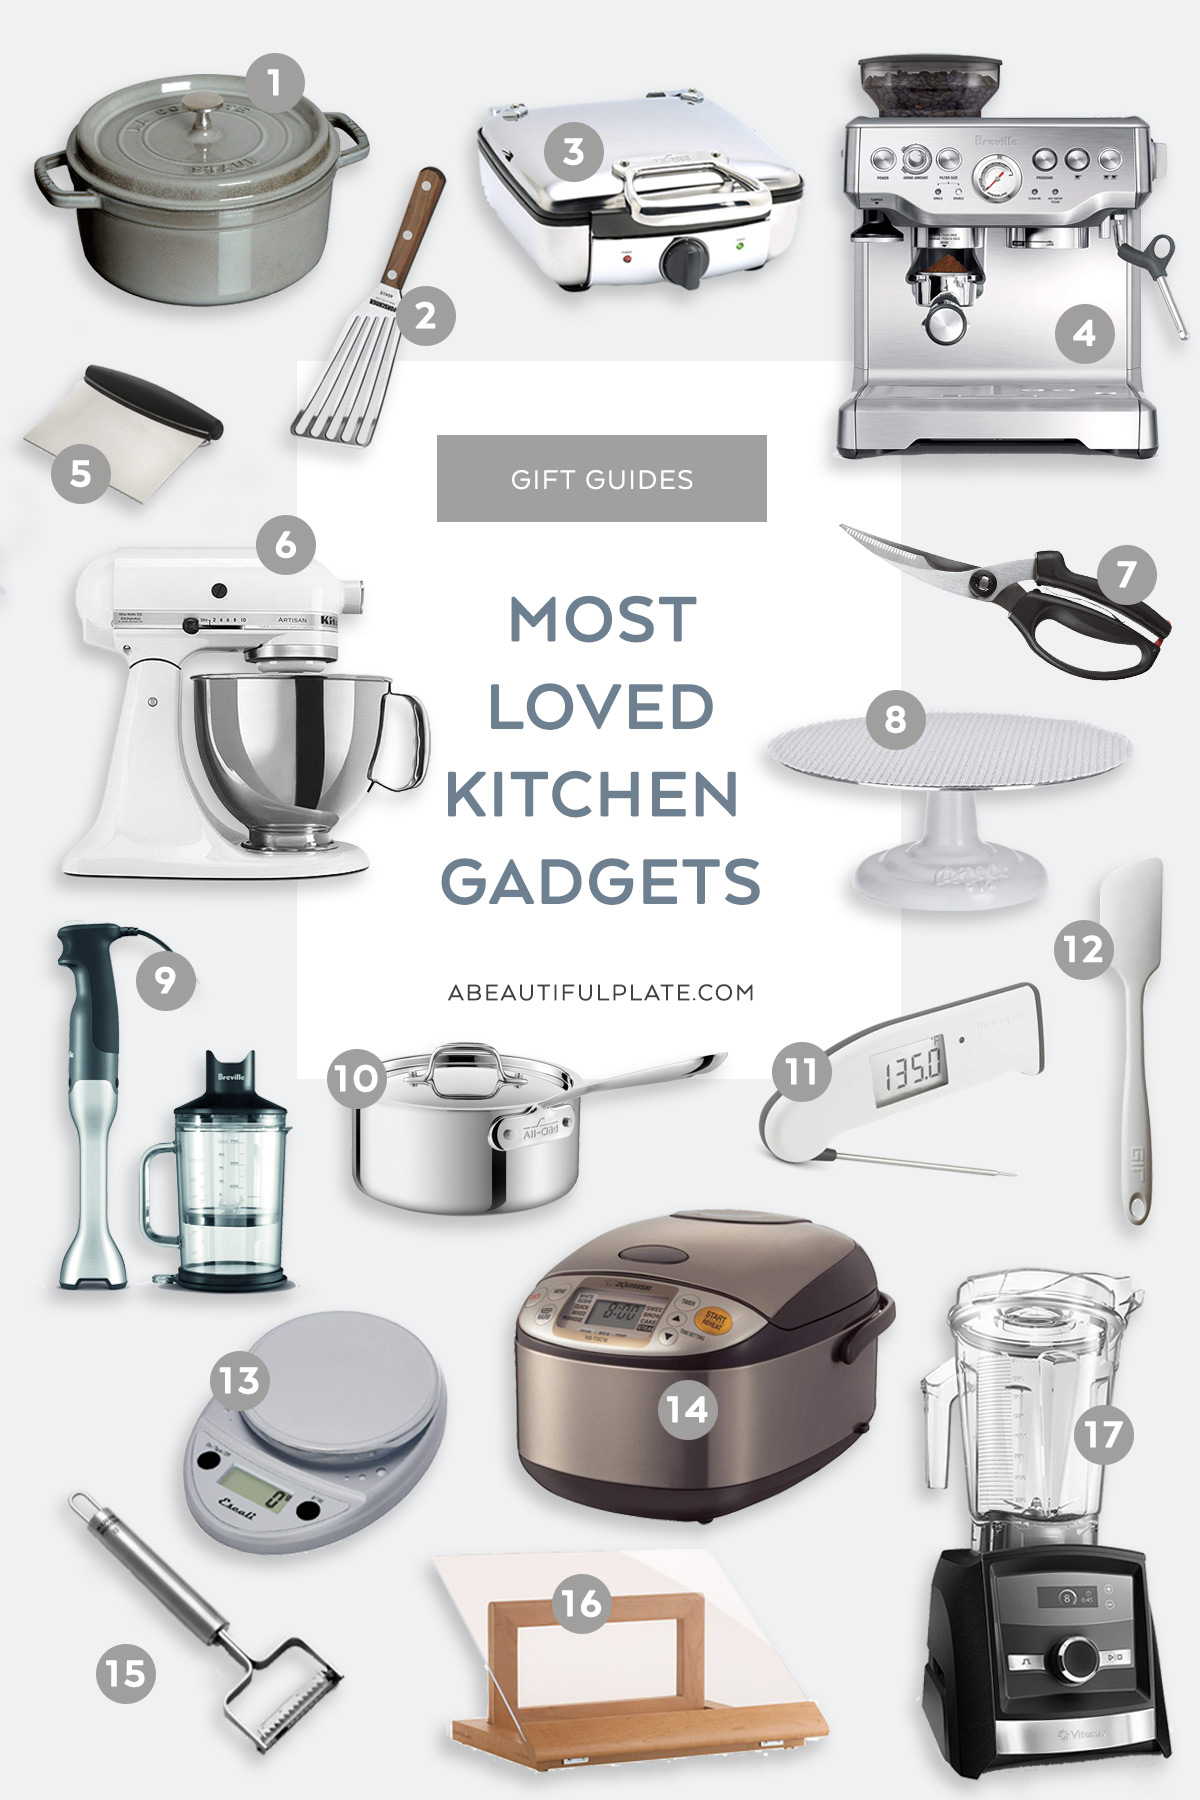 Favorite Kitchen Gadgets and Appliances - Tiffy Cooks